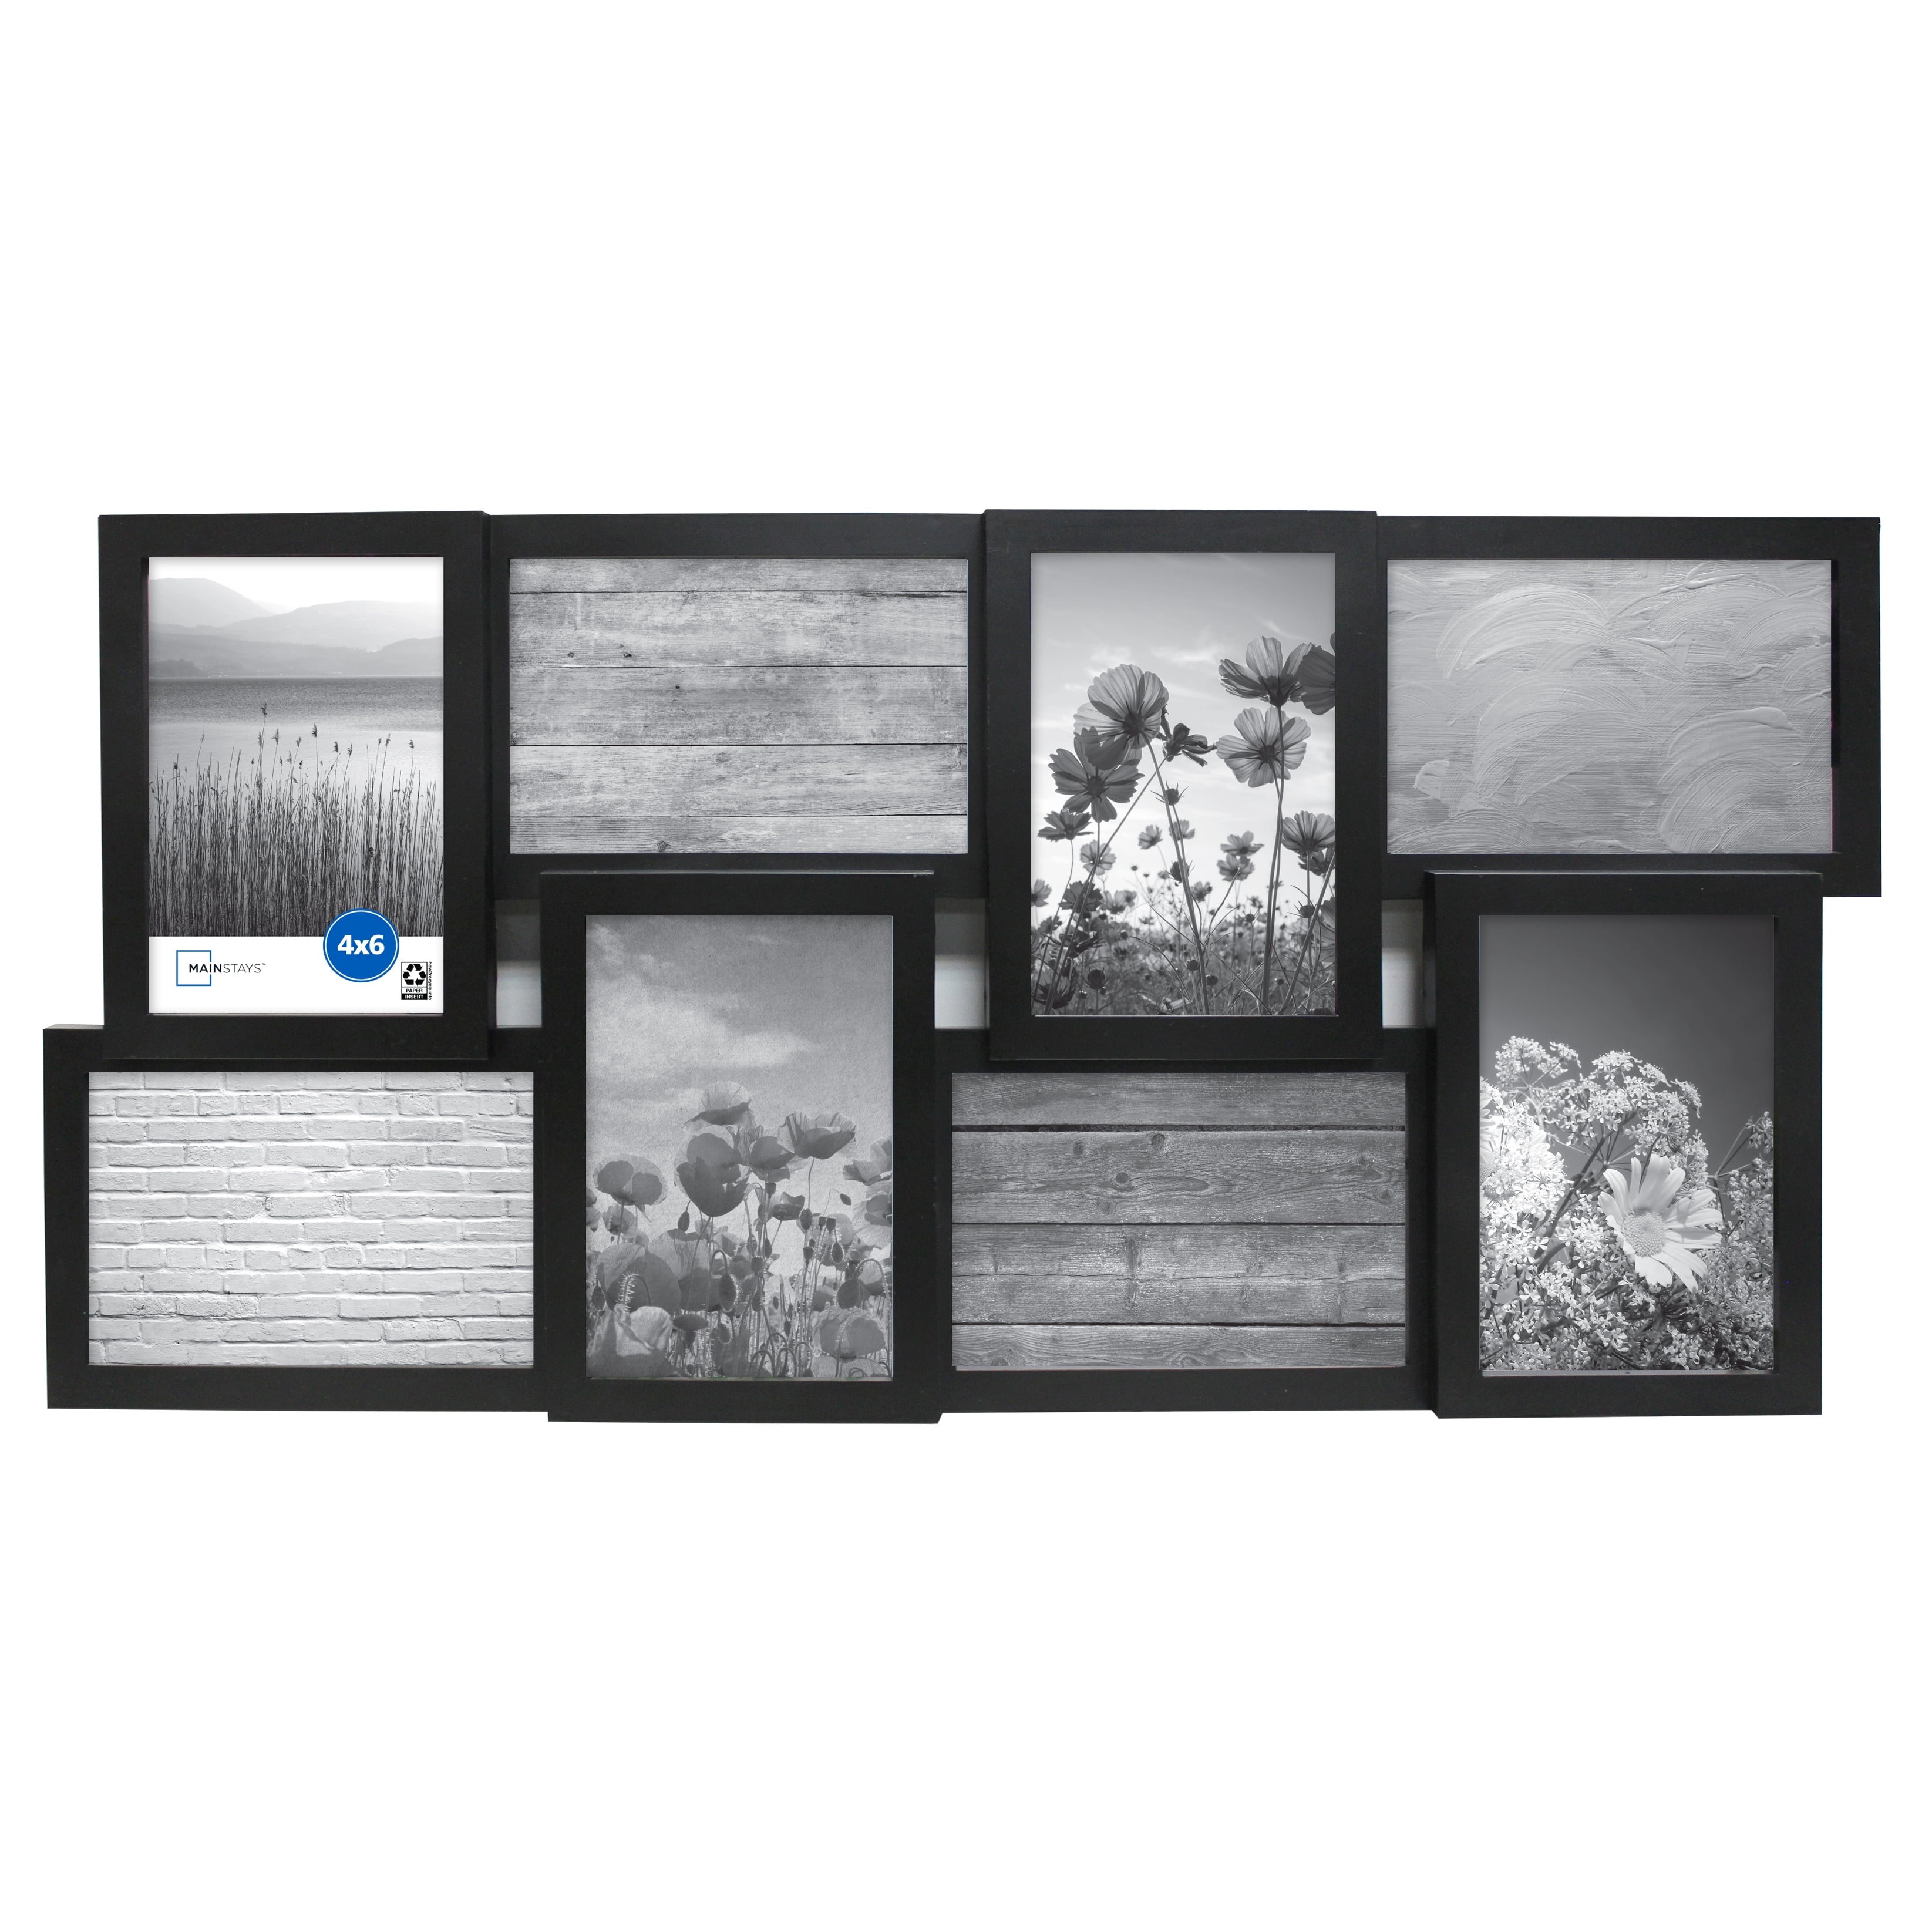 Mainstays 8-Opening 4x6 Linear Black Collage Frame - Walmart.com